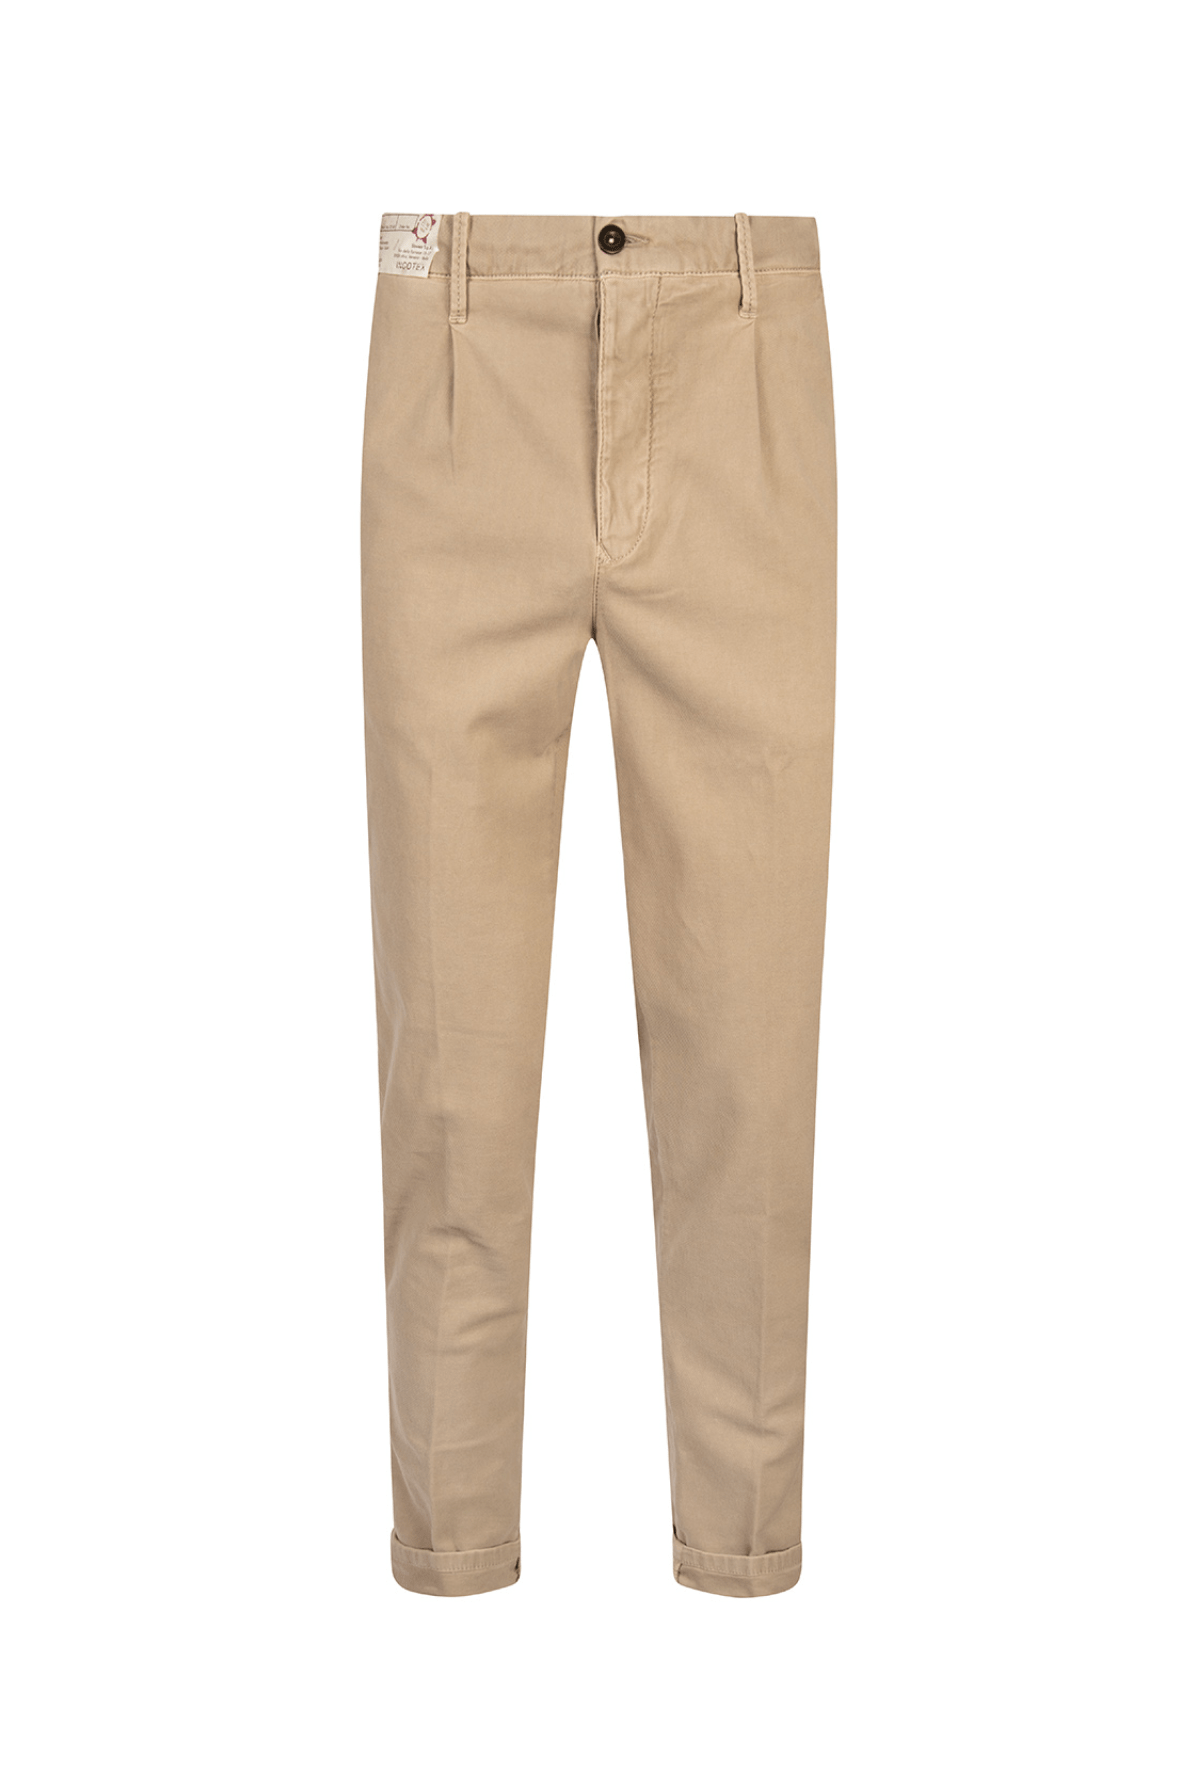 Men's Beige Trousers by Incotex - Front View